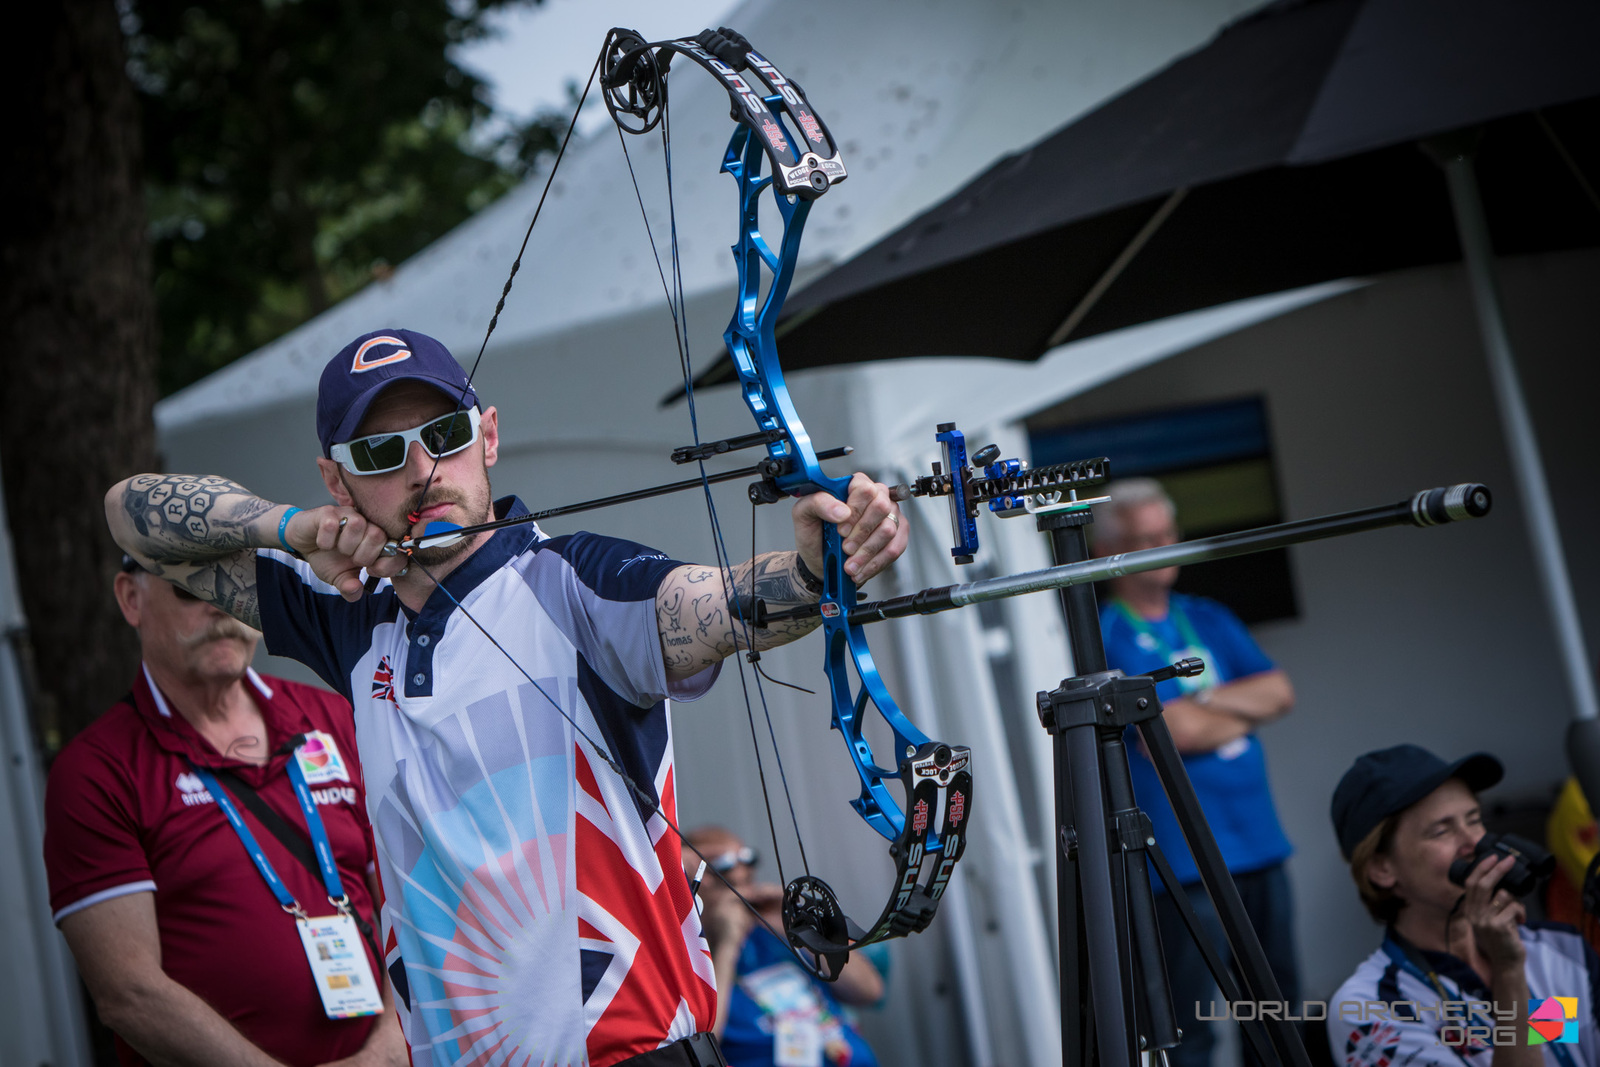 Nick Thomas competing at the World Archery Para Championships in 2019